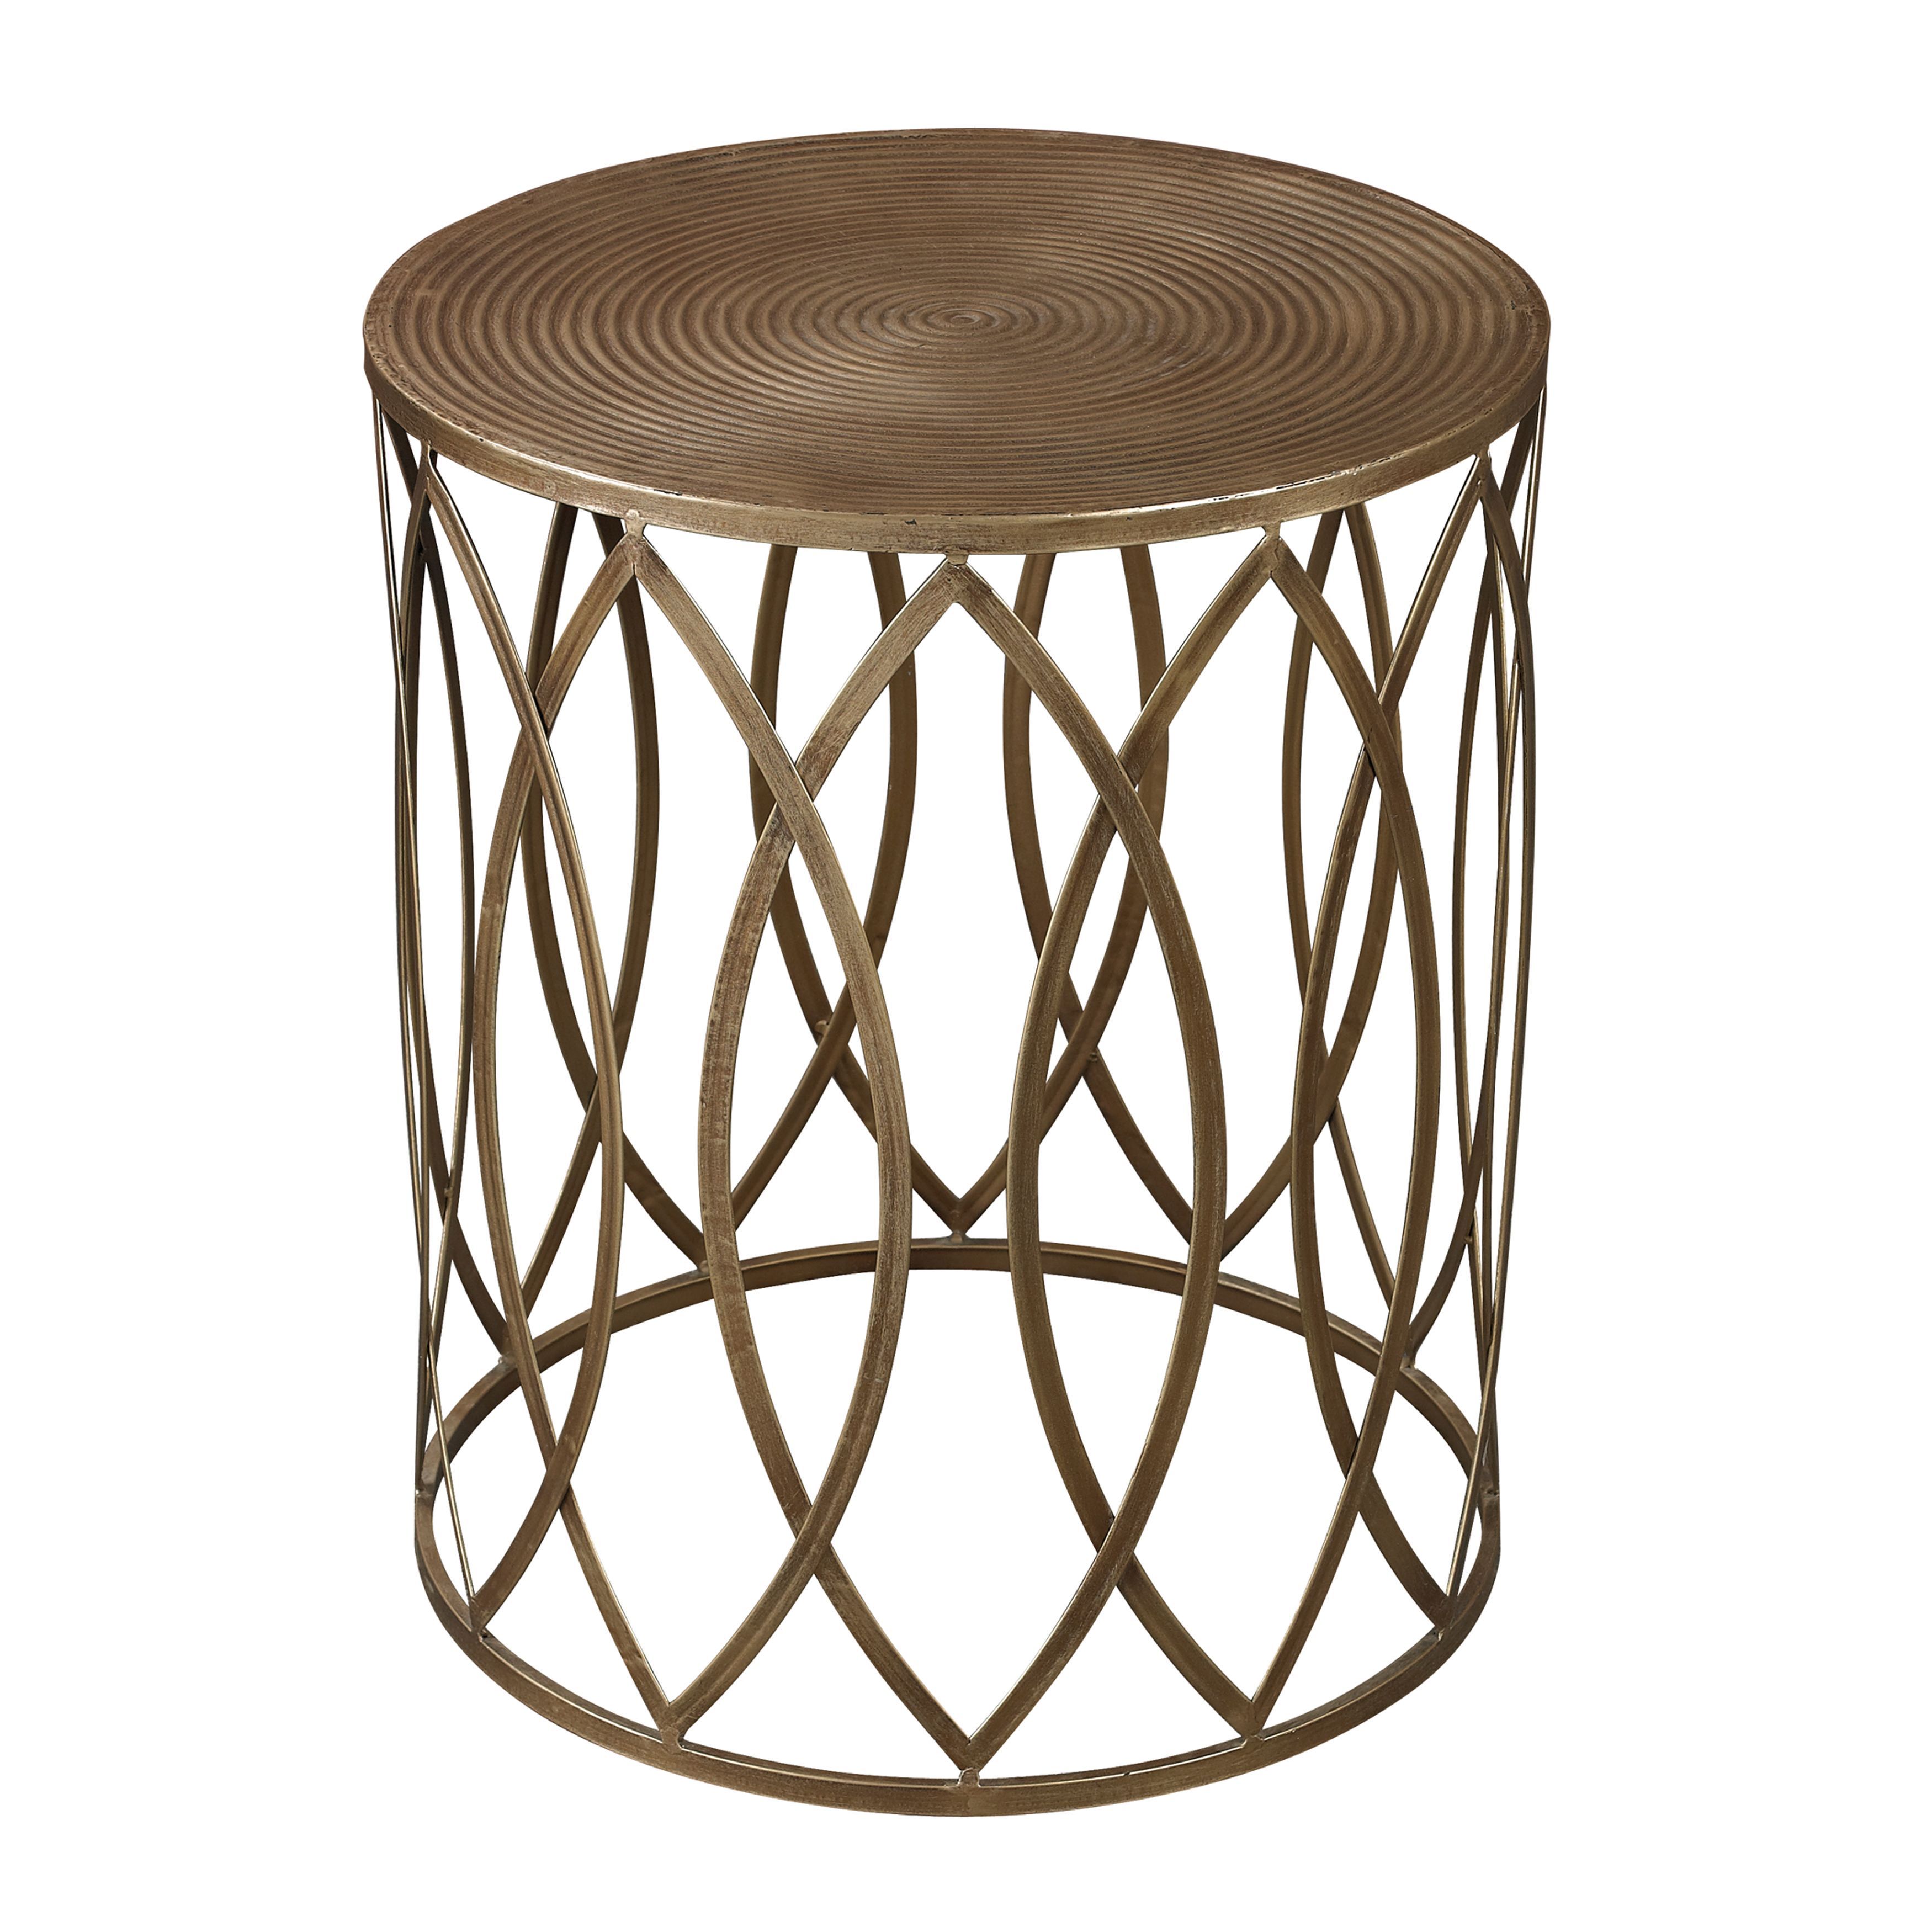 this antique gold finish round metal accent table features eyelet elegantly sculpted base and circular design the top trestle legs ethan allen buffet backyard furniture marble